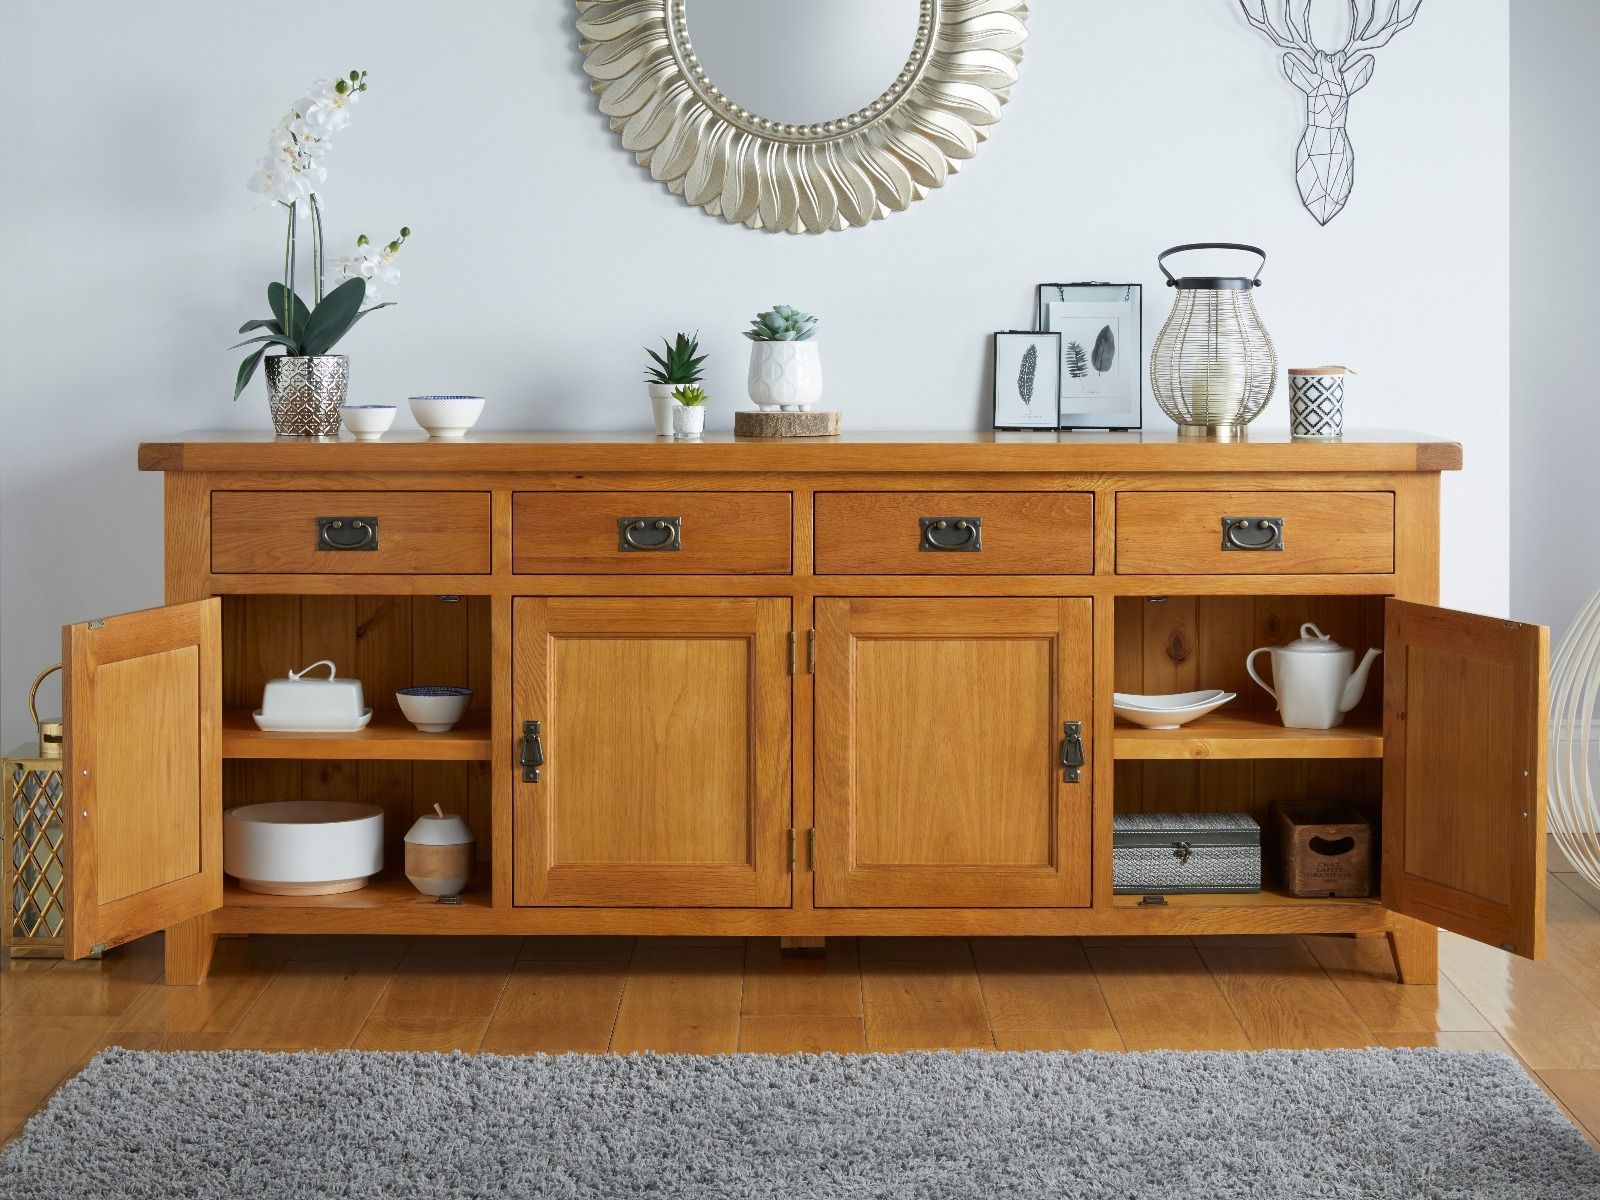 Large Country Oak Sideboard 200cm – Free Delivery | Top Furniture Throughout 4 Door Sideboards (View 7 of 15)